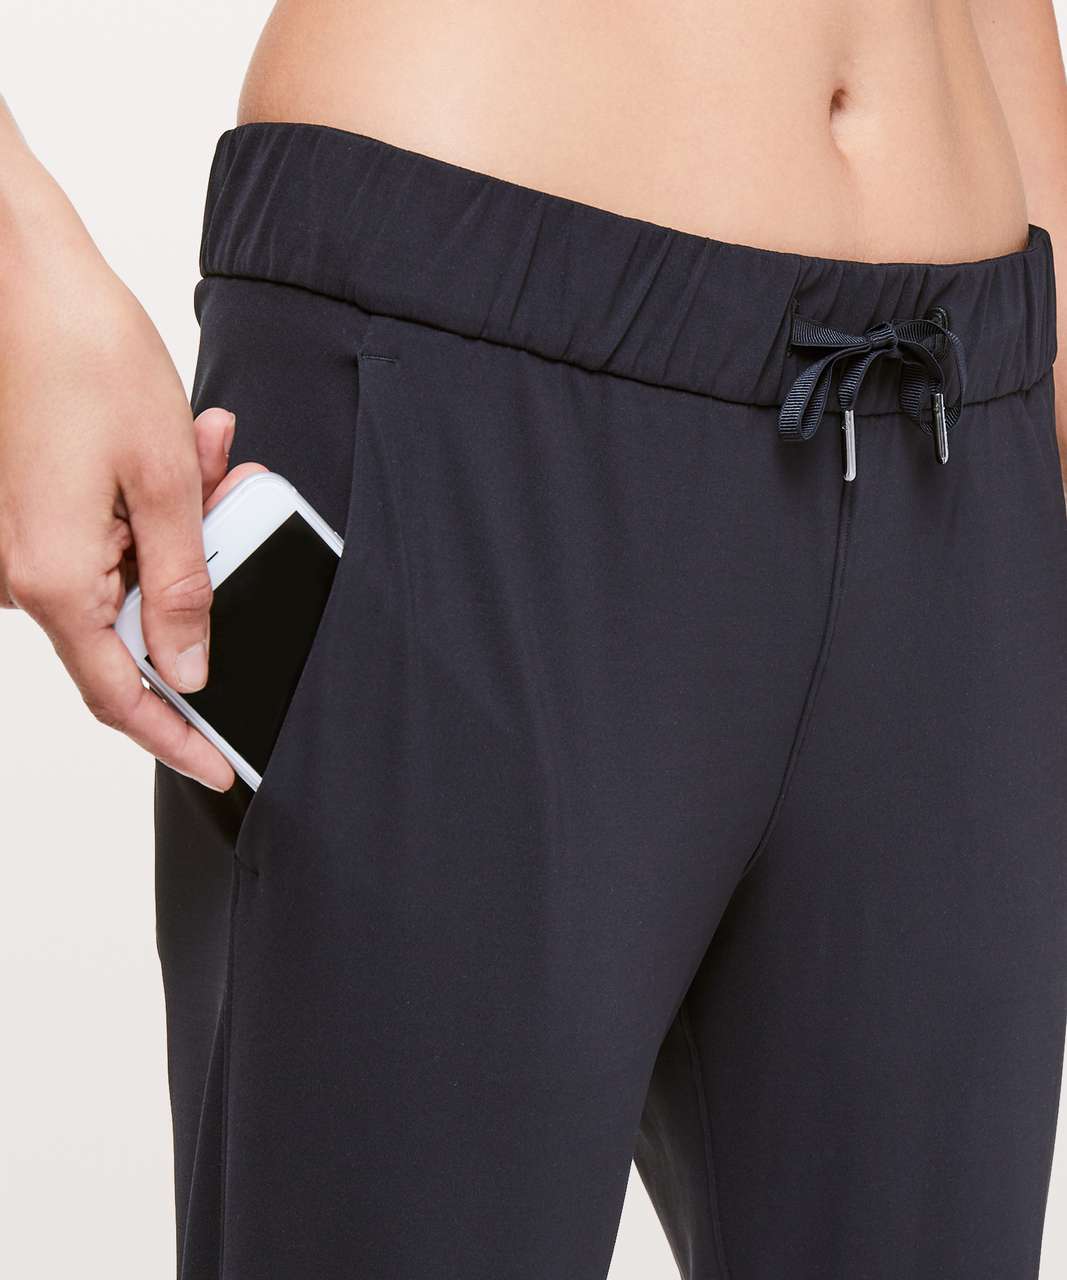 Lululemon On The Fly Crop *23" - Black (Second Release)